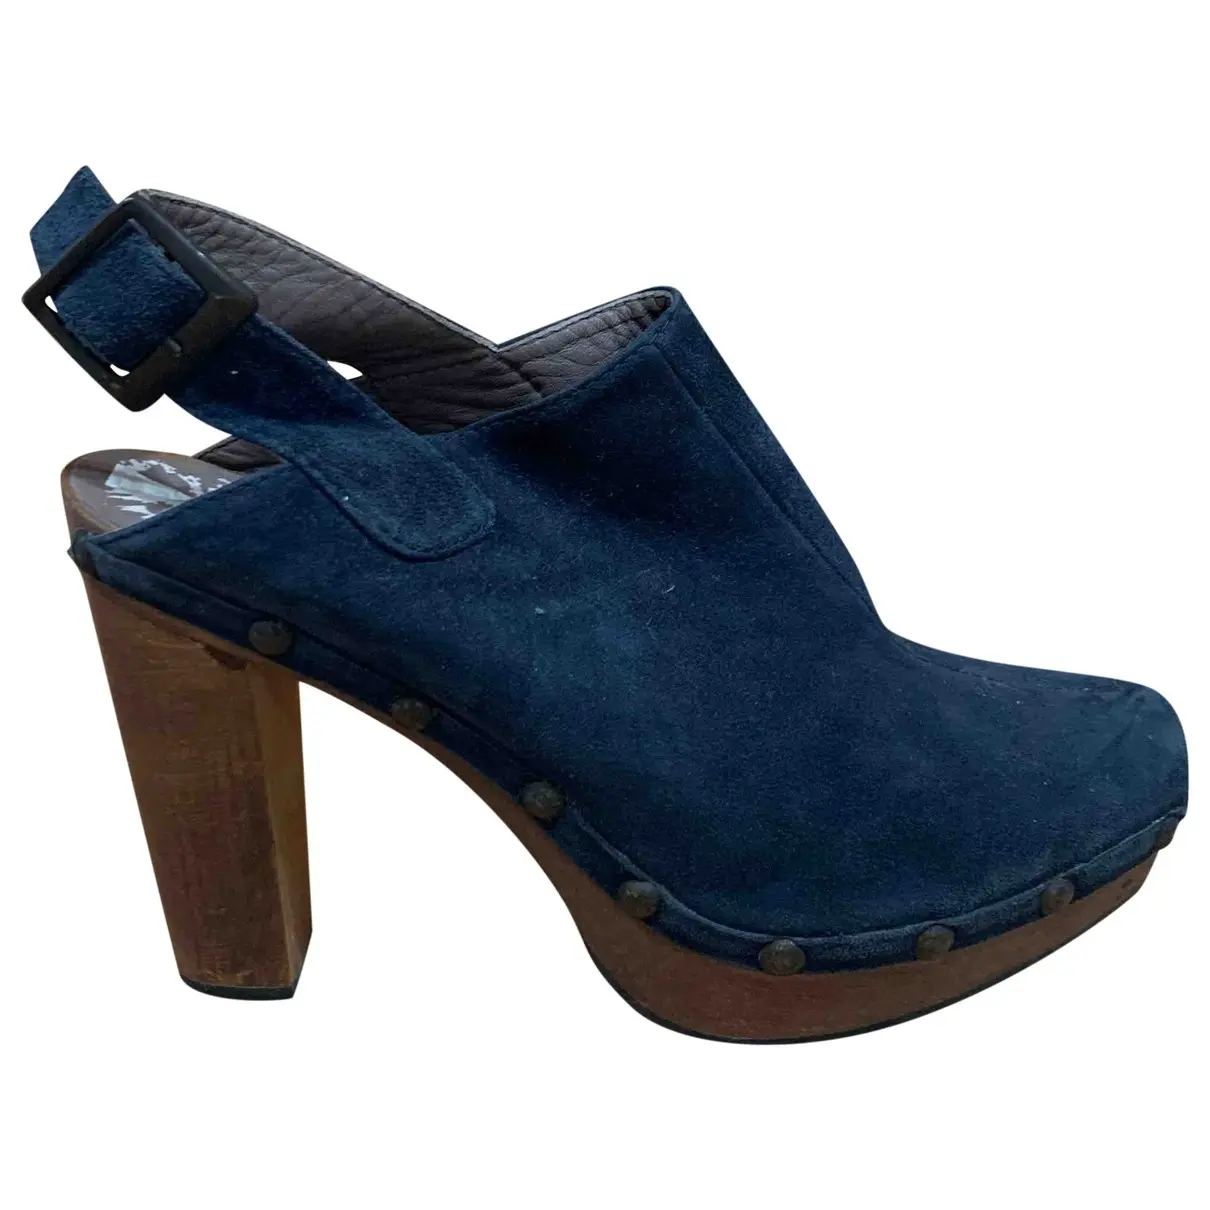 Castaner Leather mules & clogs for sale